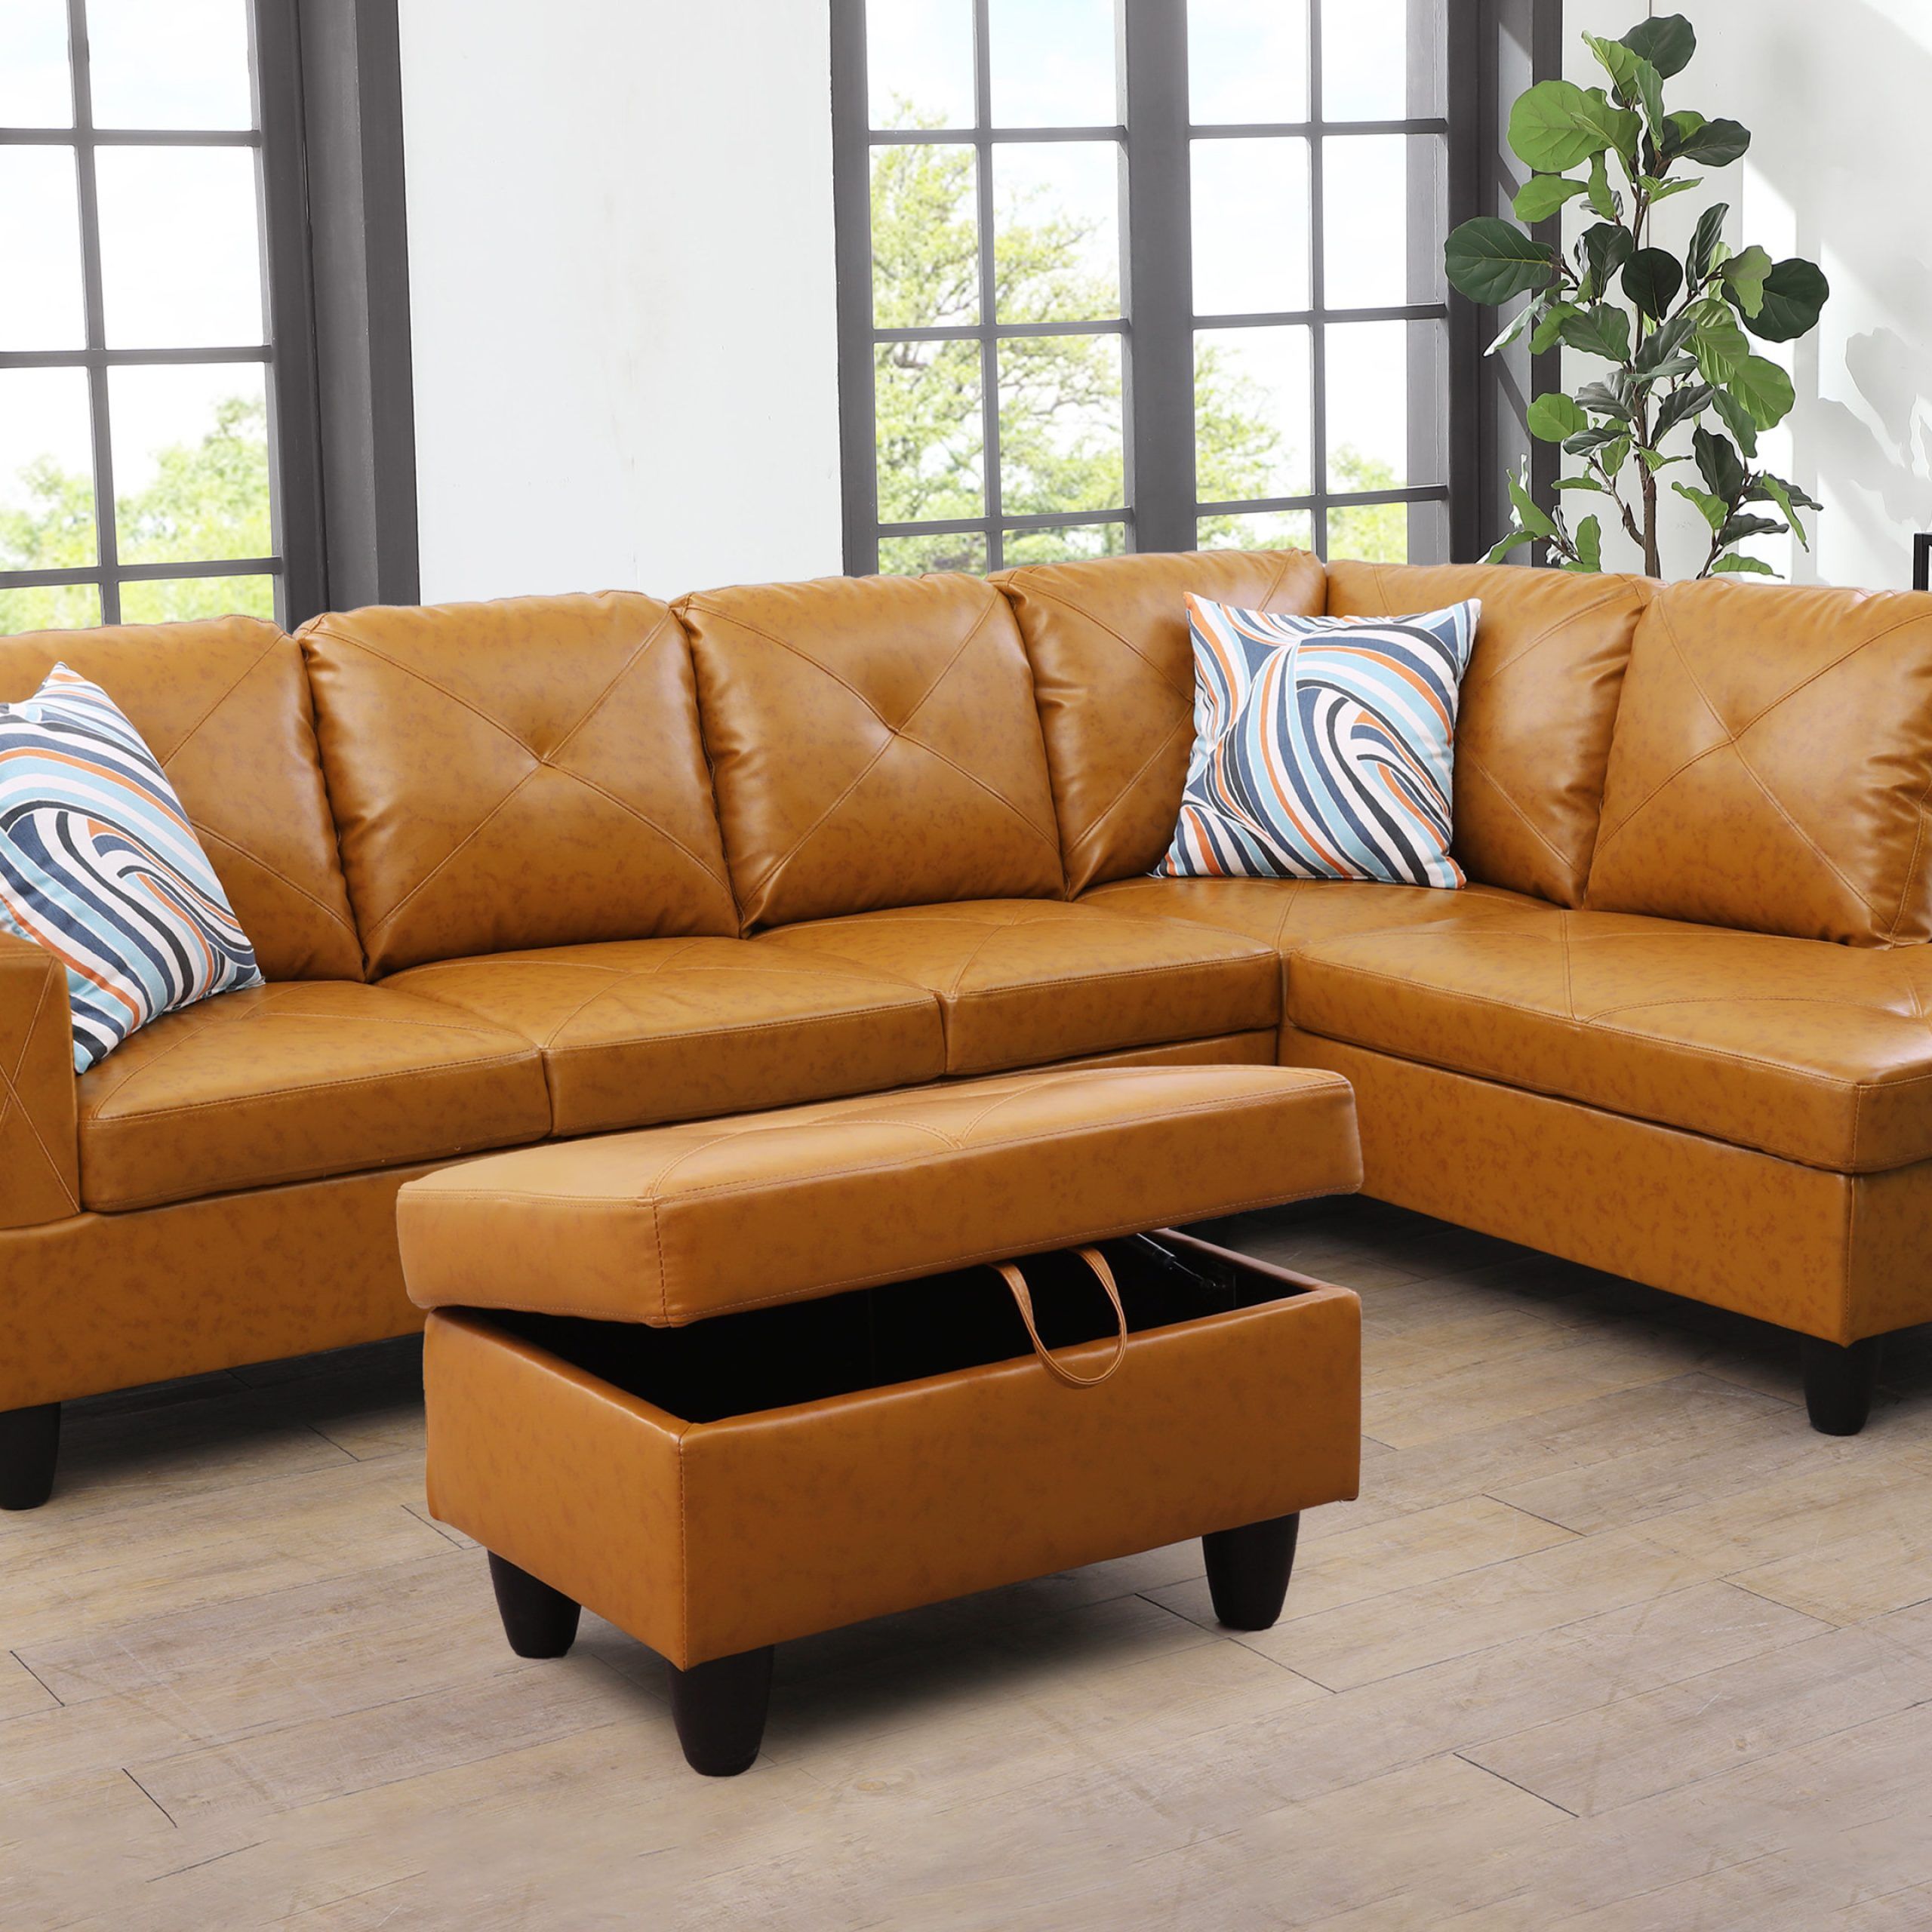 Ebern Designs 3 – Piece Vegan Leather Sectional & Reviews | Wayfair With 3 Piece Leather Sectional Sofa Sets (Photo 9 of 15)